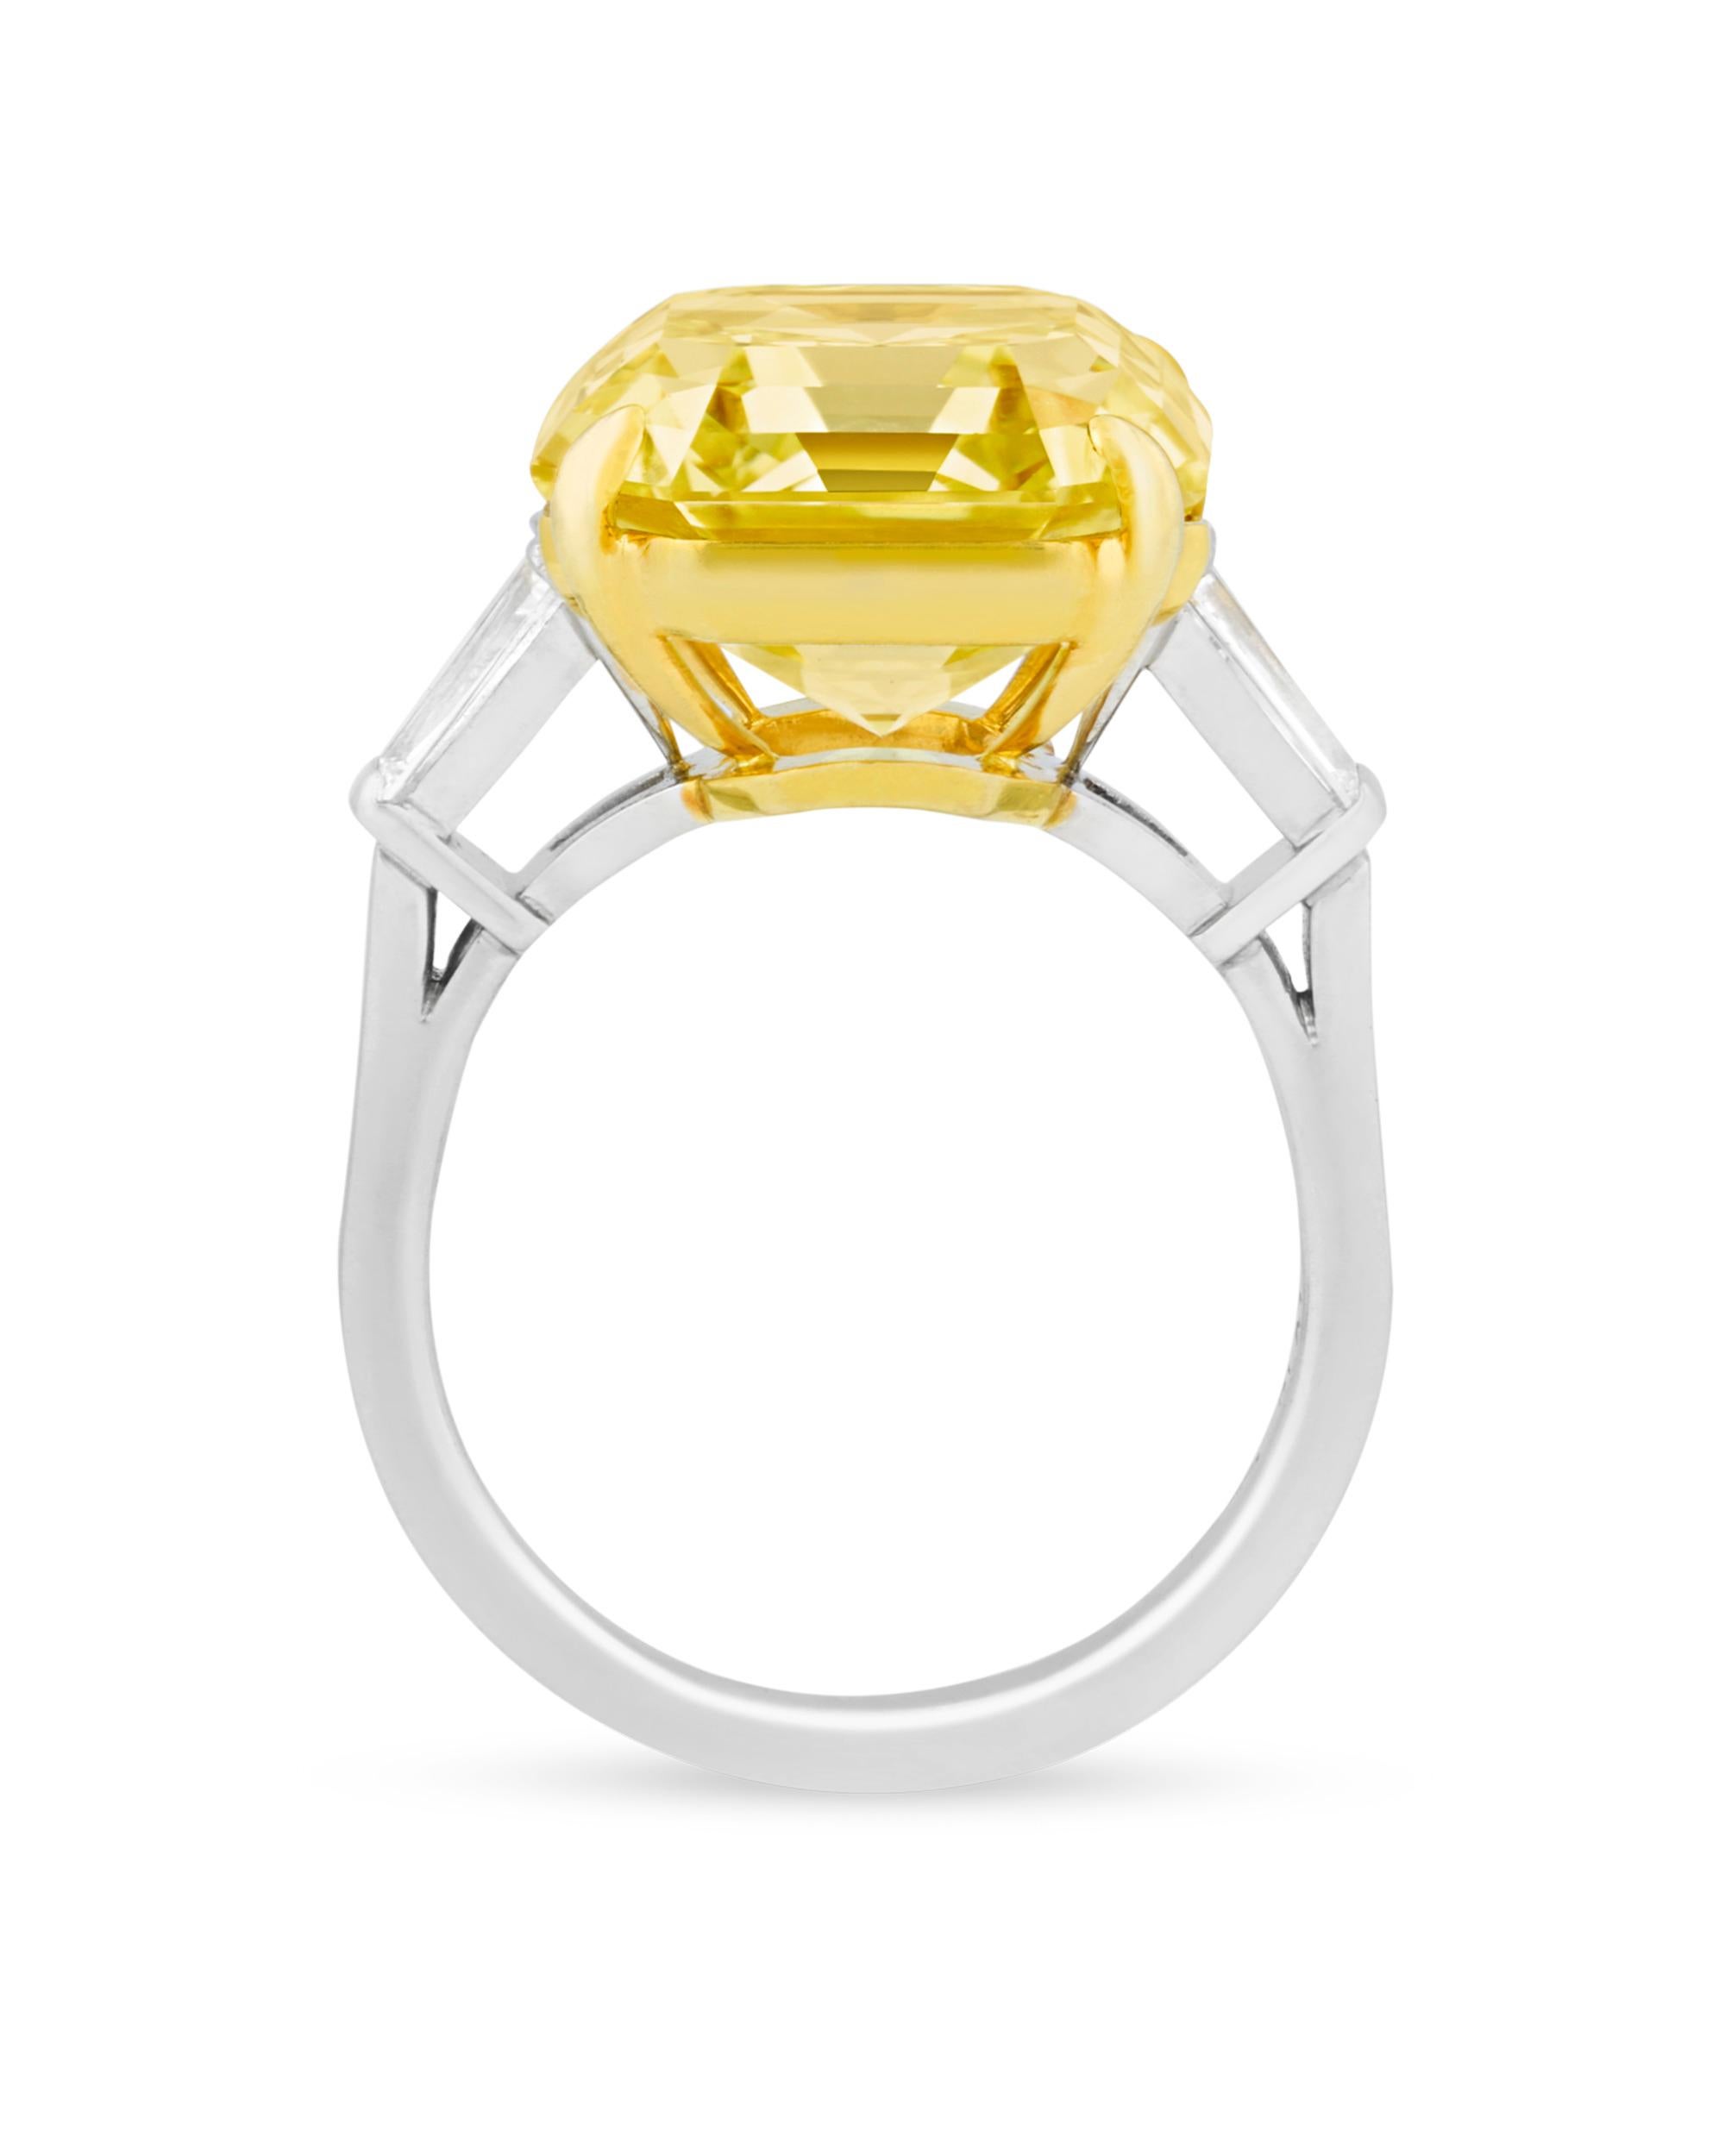 An Asscher-cut 12.33-carat fancy intense yellow diamond displays its radiant hue in this incredible ring. The rare stone is certified by the Gemological Institute of America to be natural fancy intense, a grade that is the most desirable in diamonds